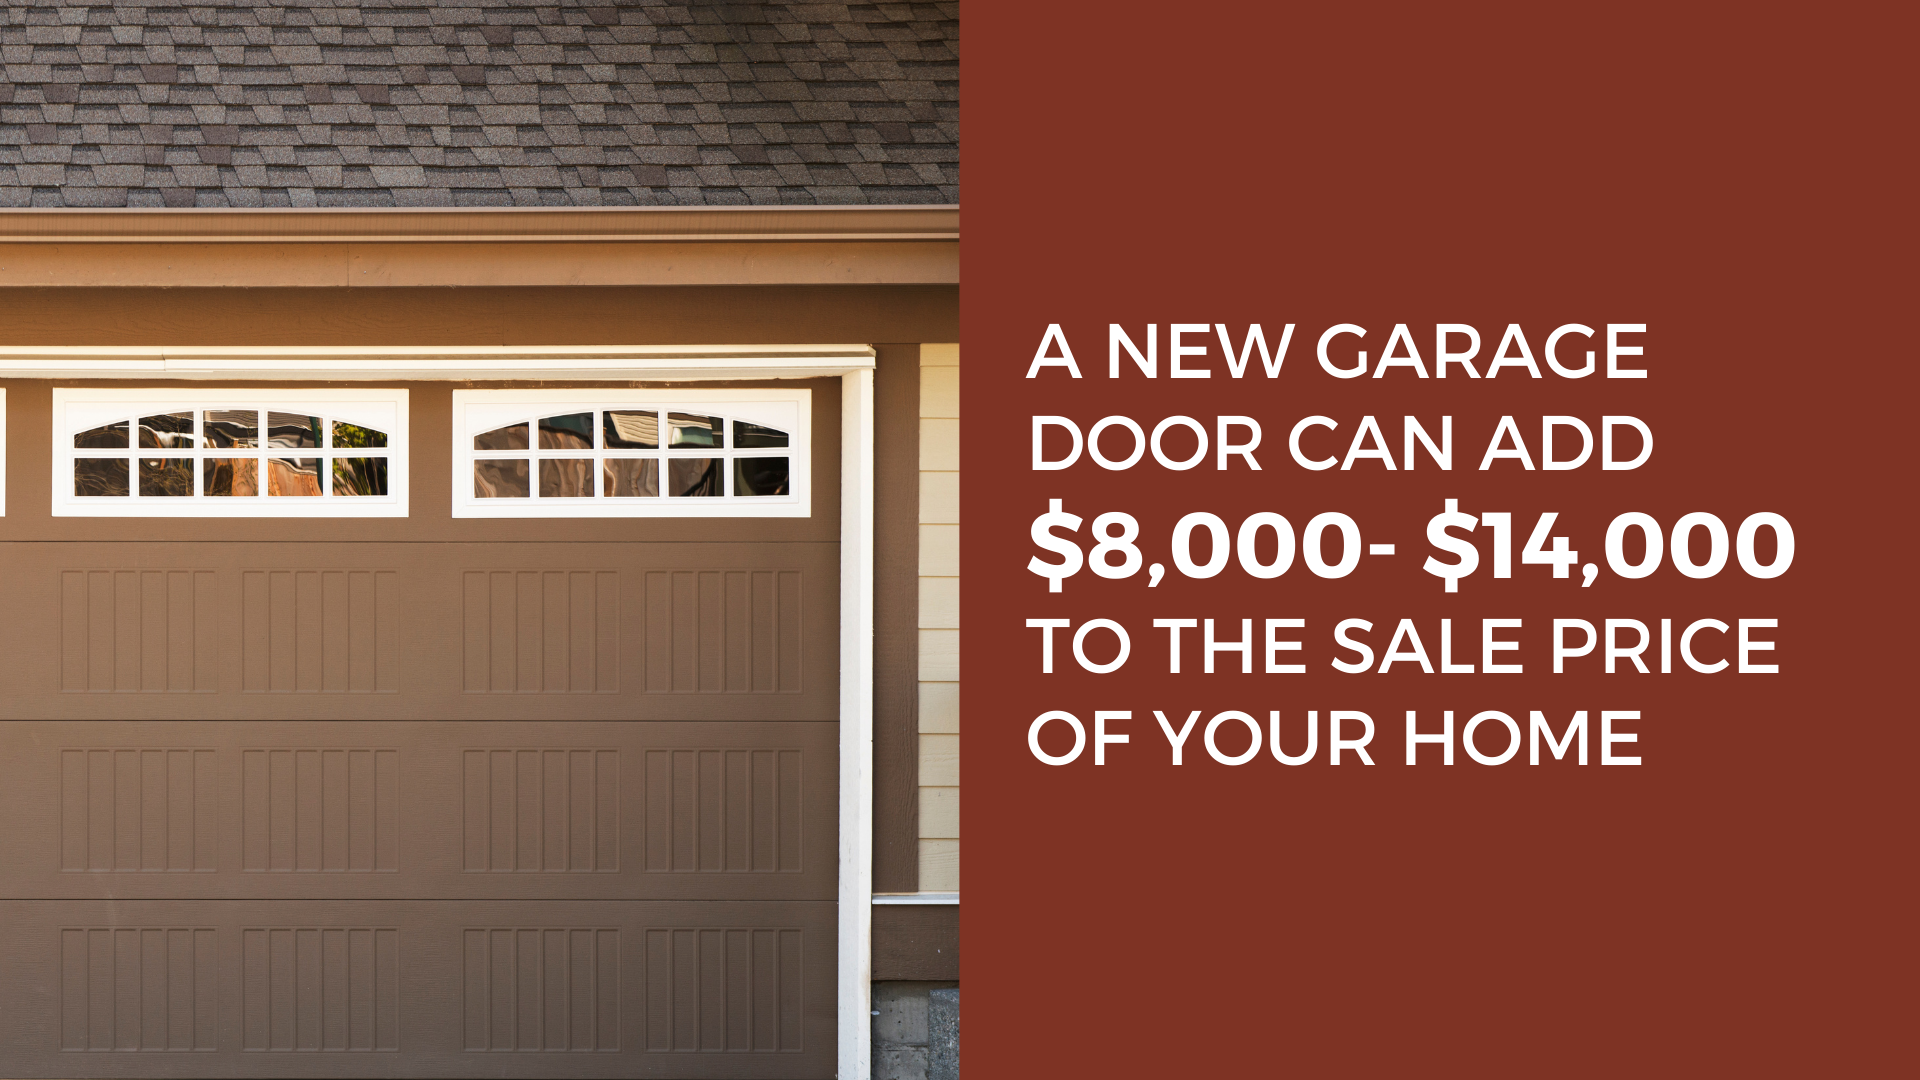 Brown garage door with windows at the top. Adjacent to the image is text stating, "A NEW GARAGE DOOR CAN ADD $8,000- $14,000 TO THE SALE PRICE OF YOUR HOME," set against a dark red background. T